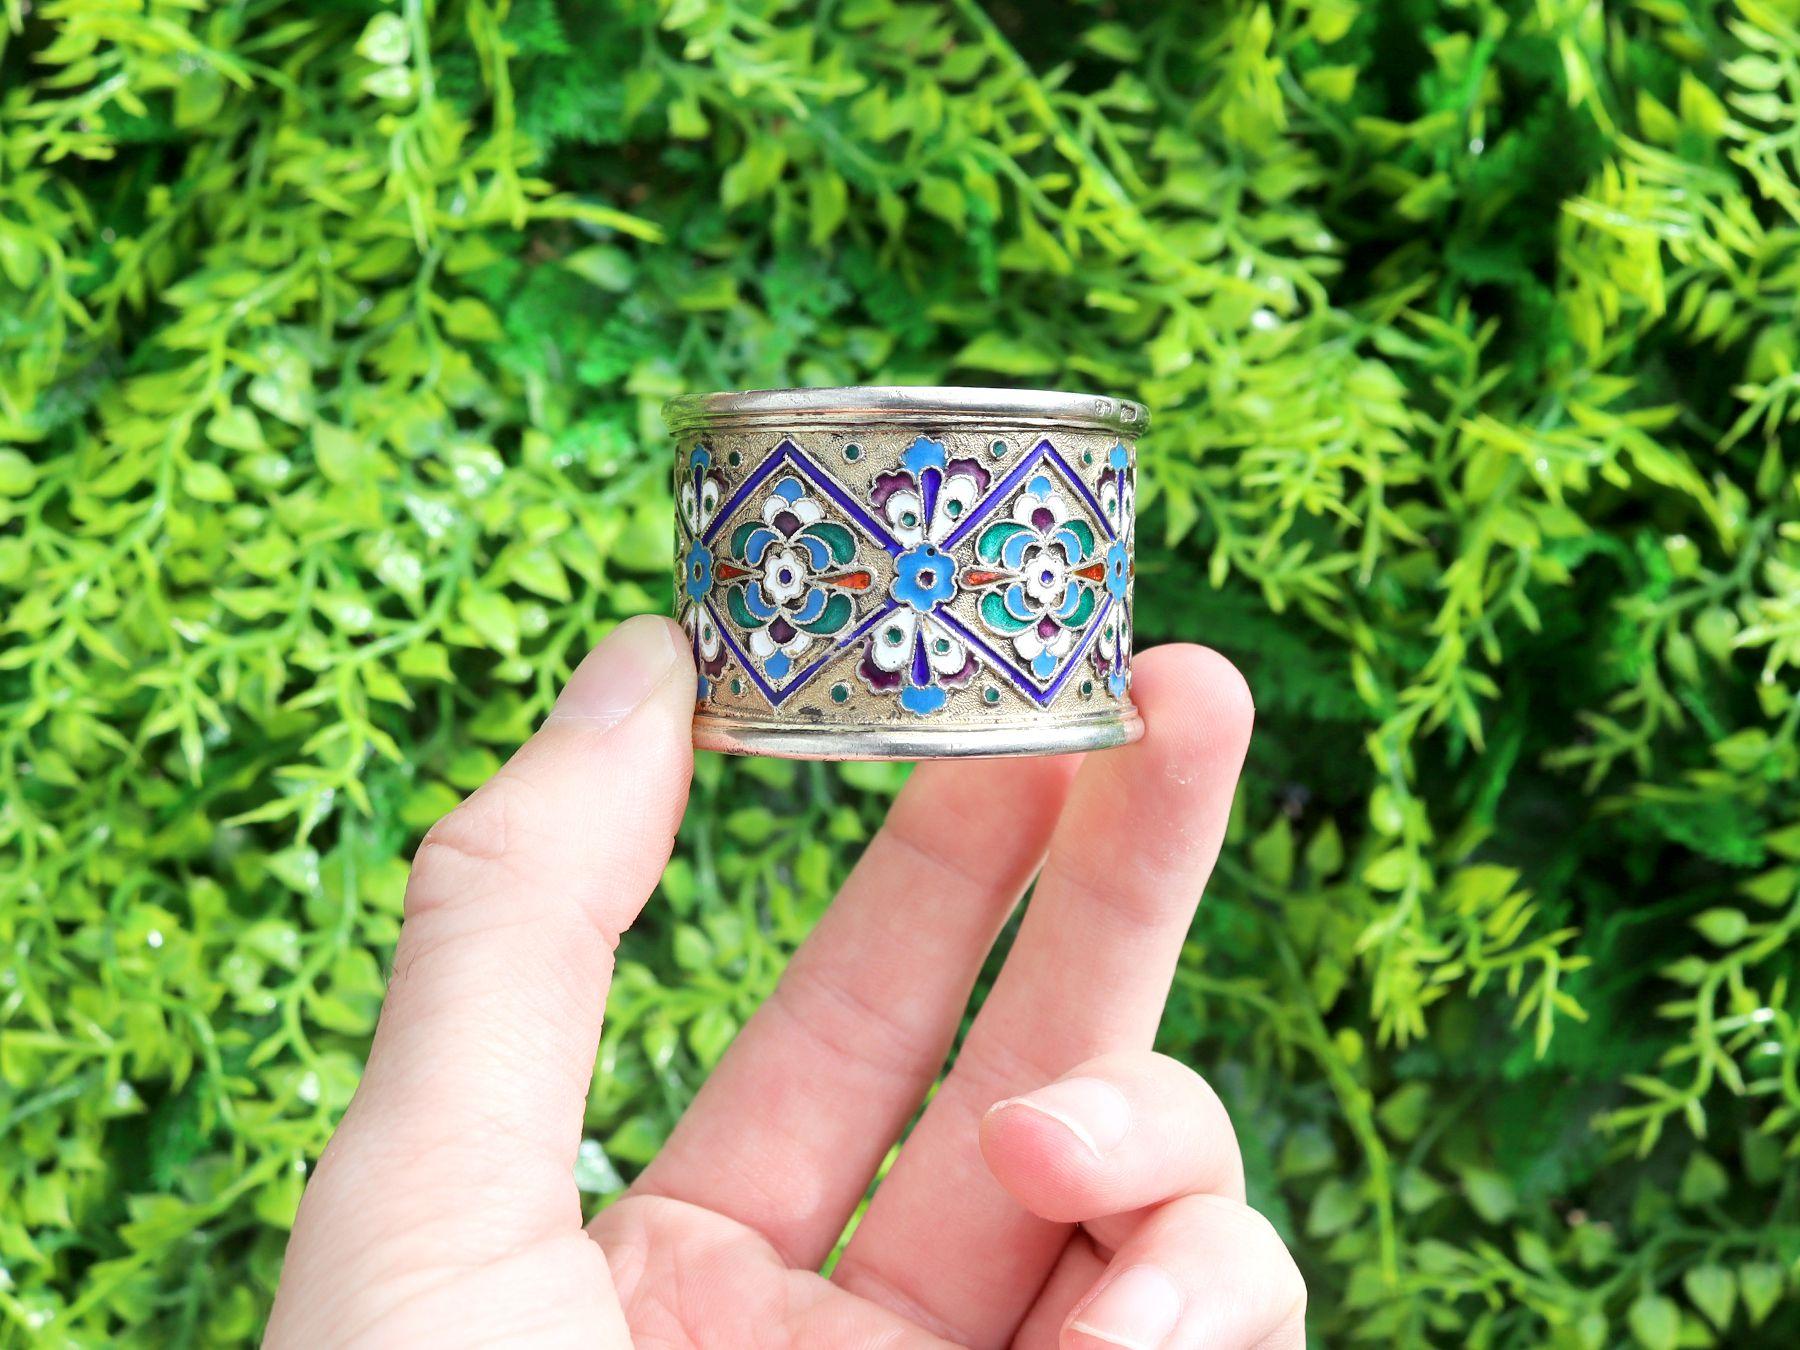 An exceptional, fine and impressive antique Russian silver gilt and polychrome cloisonné enamel napkin ring; an addition to our Russian silverware collection.

This exceptional antique Russian silver gilt napkin ring has a cylindrical form.

The